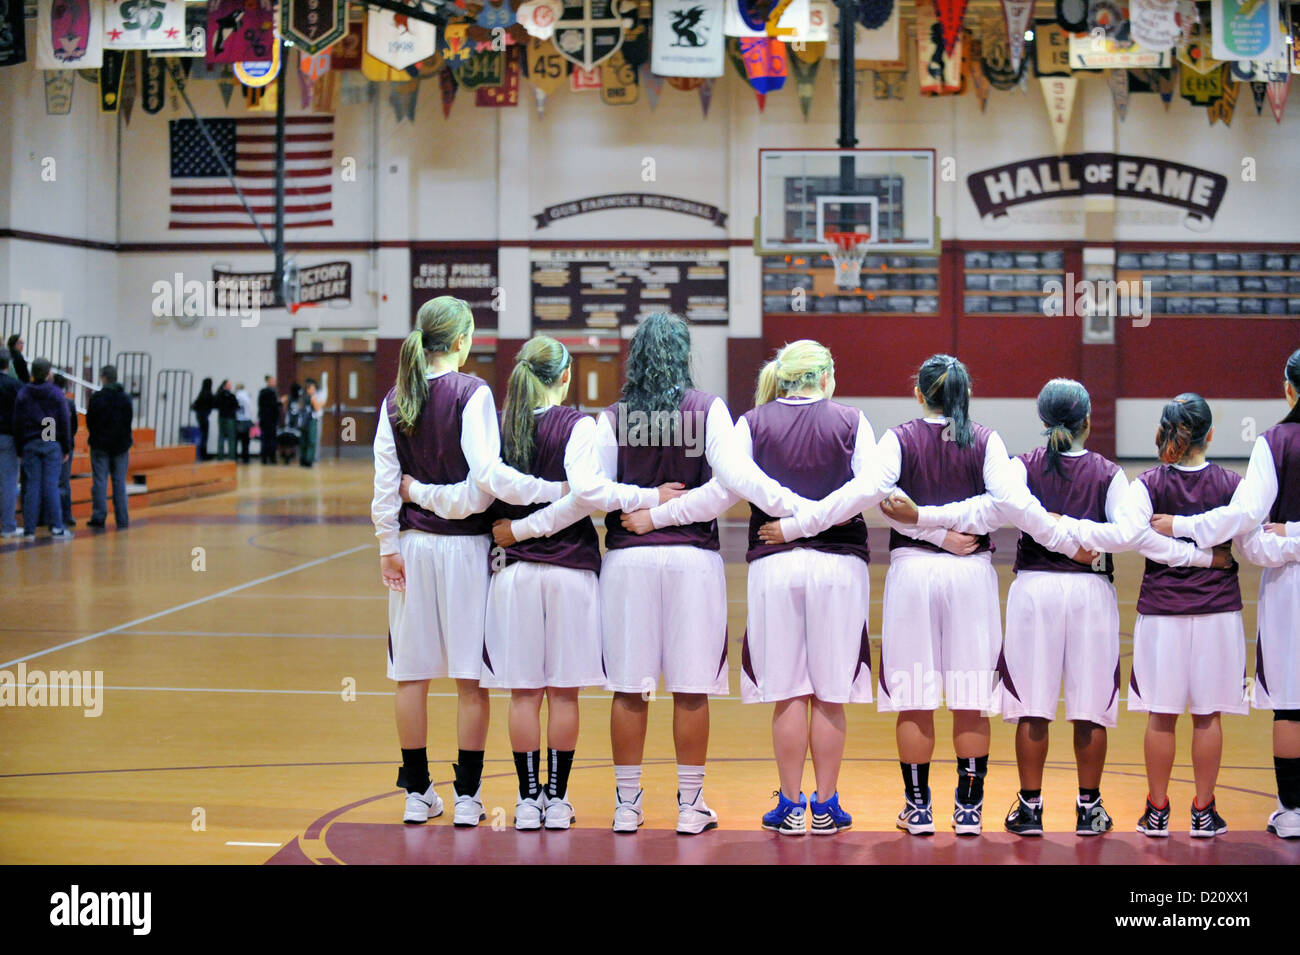 Teammates link arms during the playing of the Star Spangled Banner prior to the start of their game. USA. Stock Photo